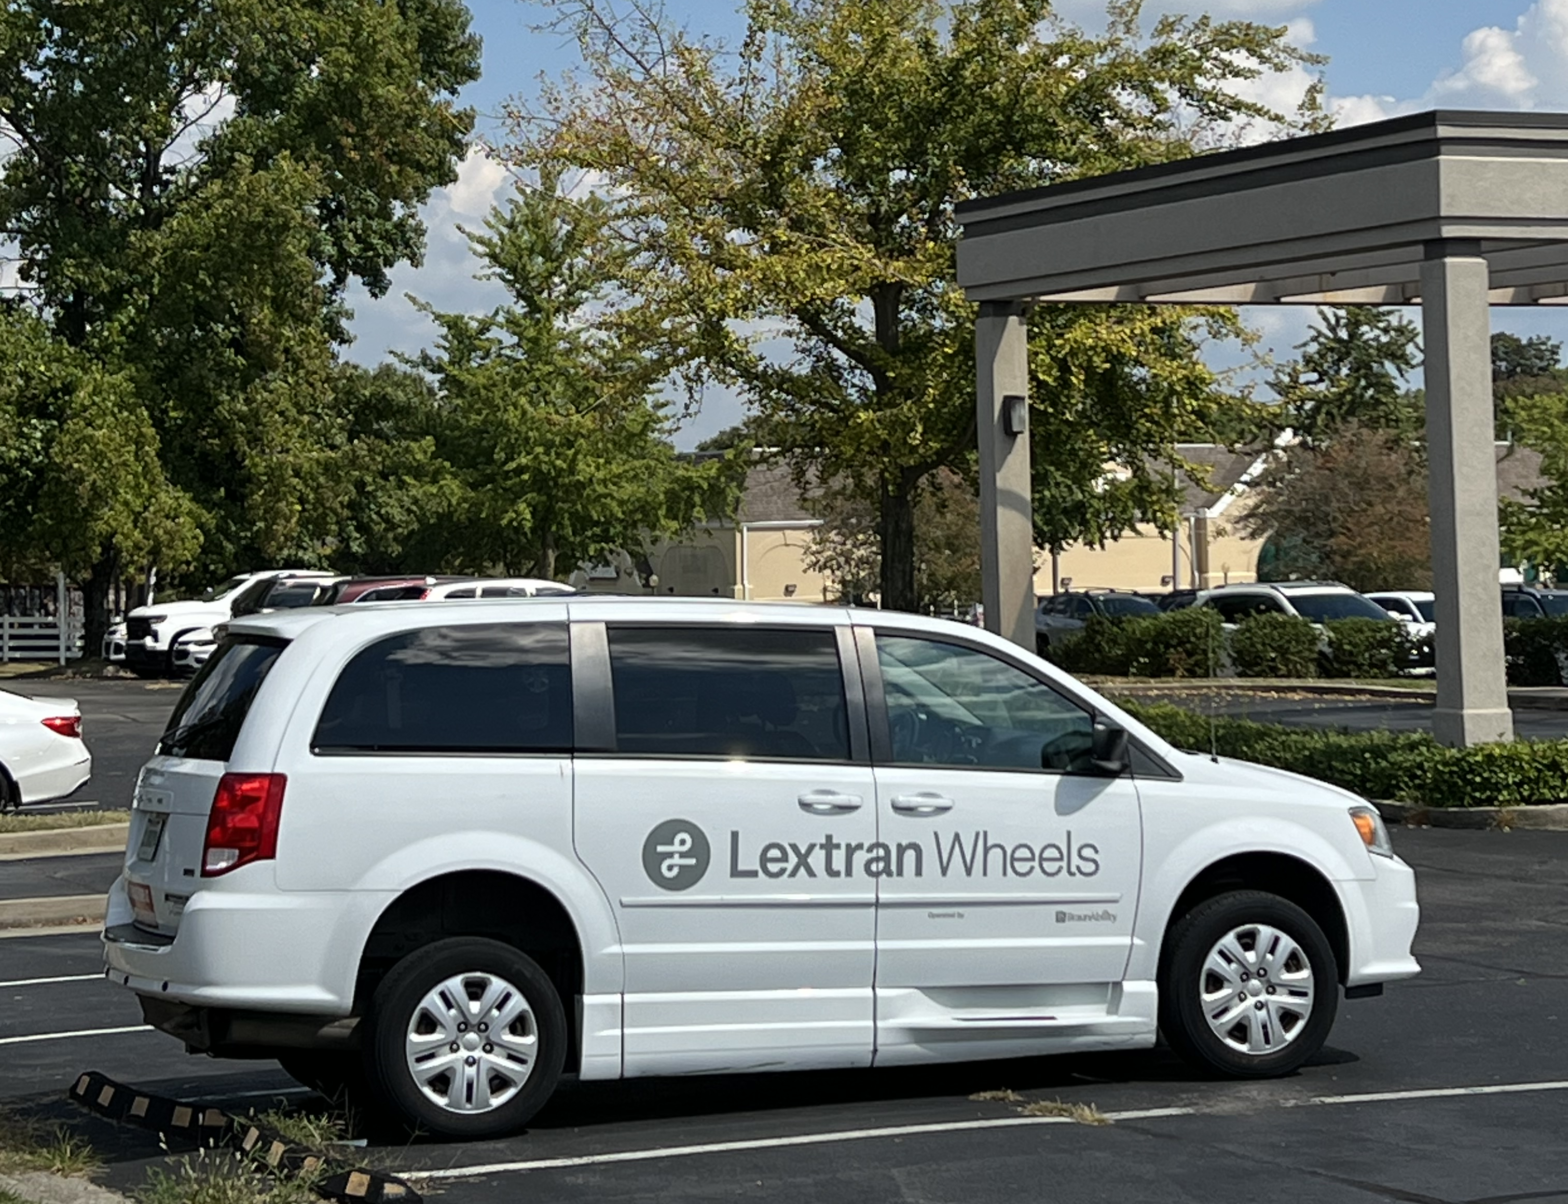 Image of a white paratransit van parked in a parking lot with the "Lextran Wheels" logo in gray along the side of the vehicle. The van is designed for accessible transportation, featuring additional space for passenger comfort and accommodations for individuals with disabilities.